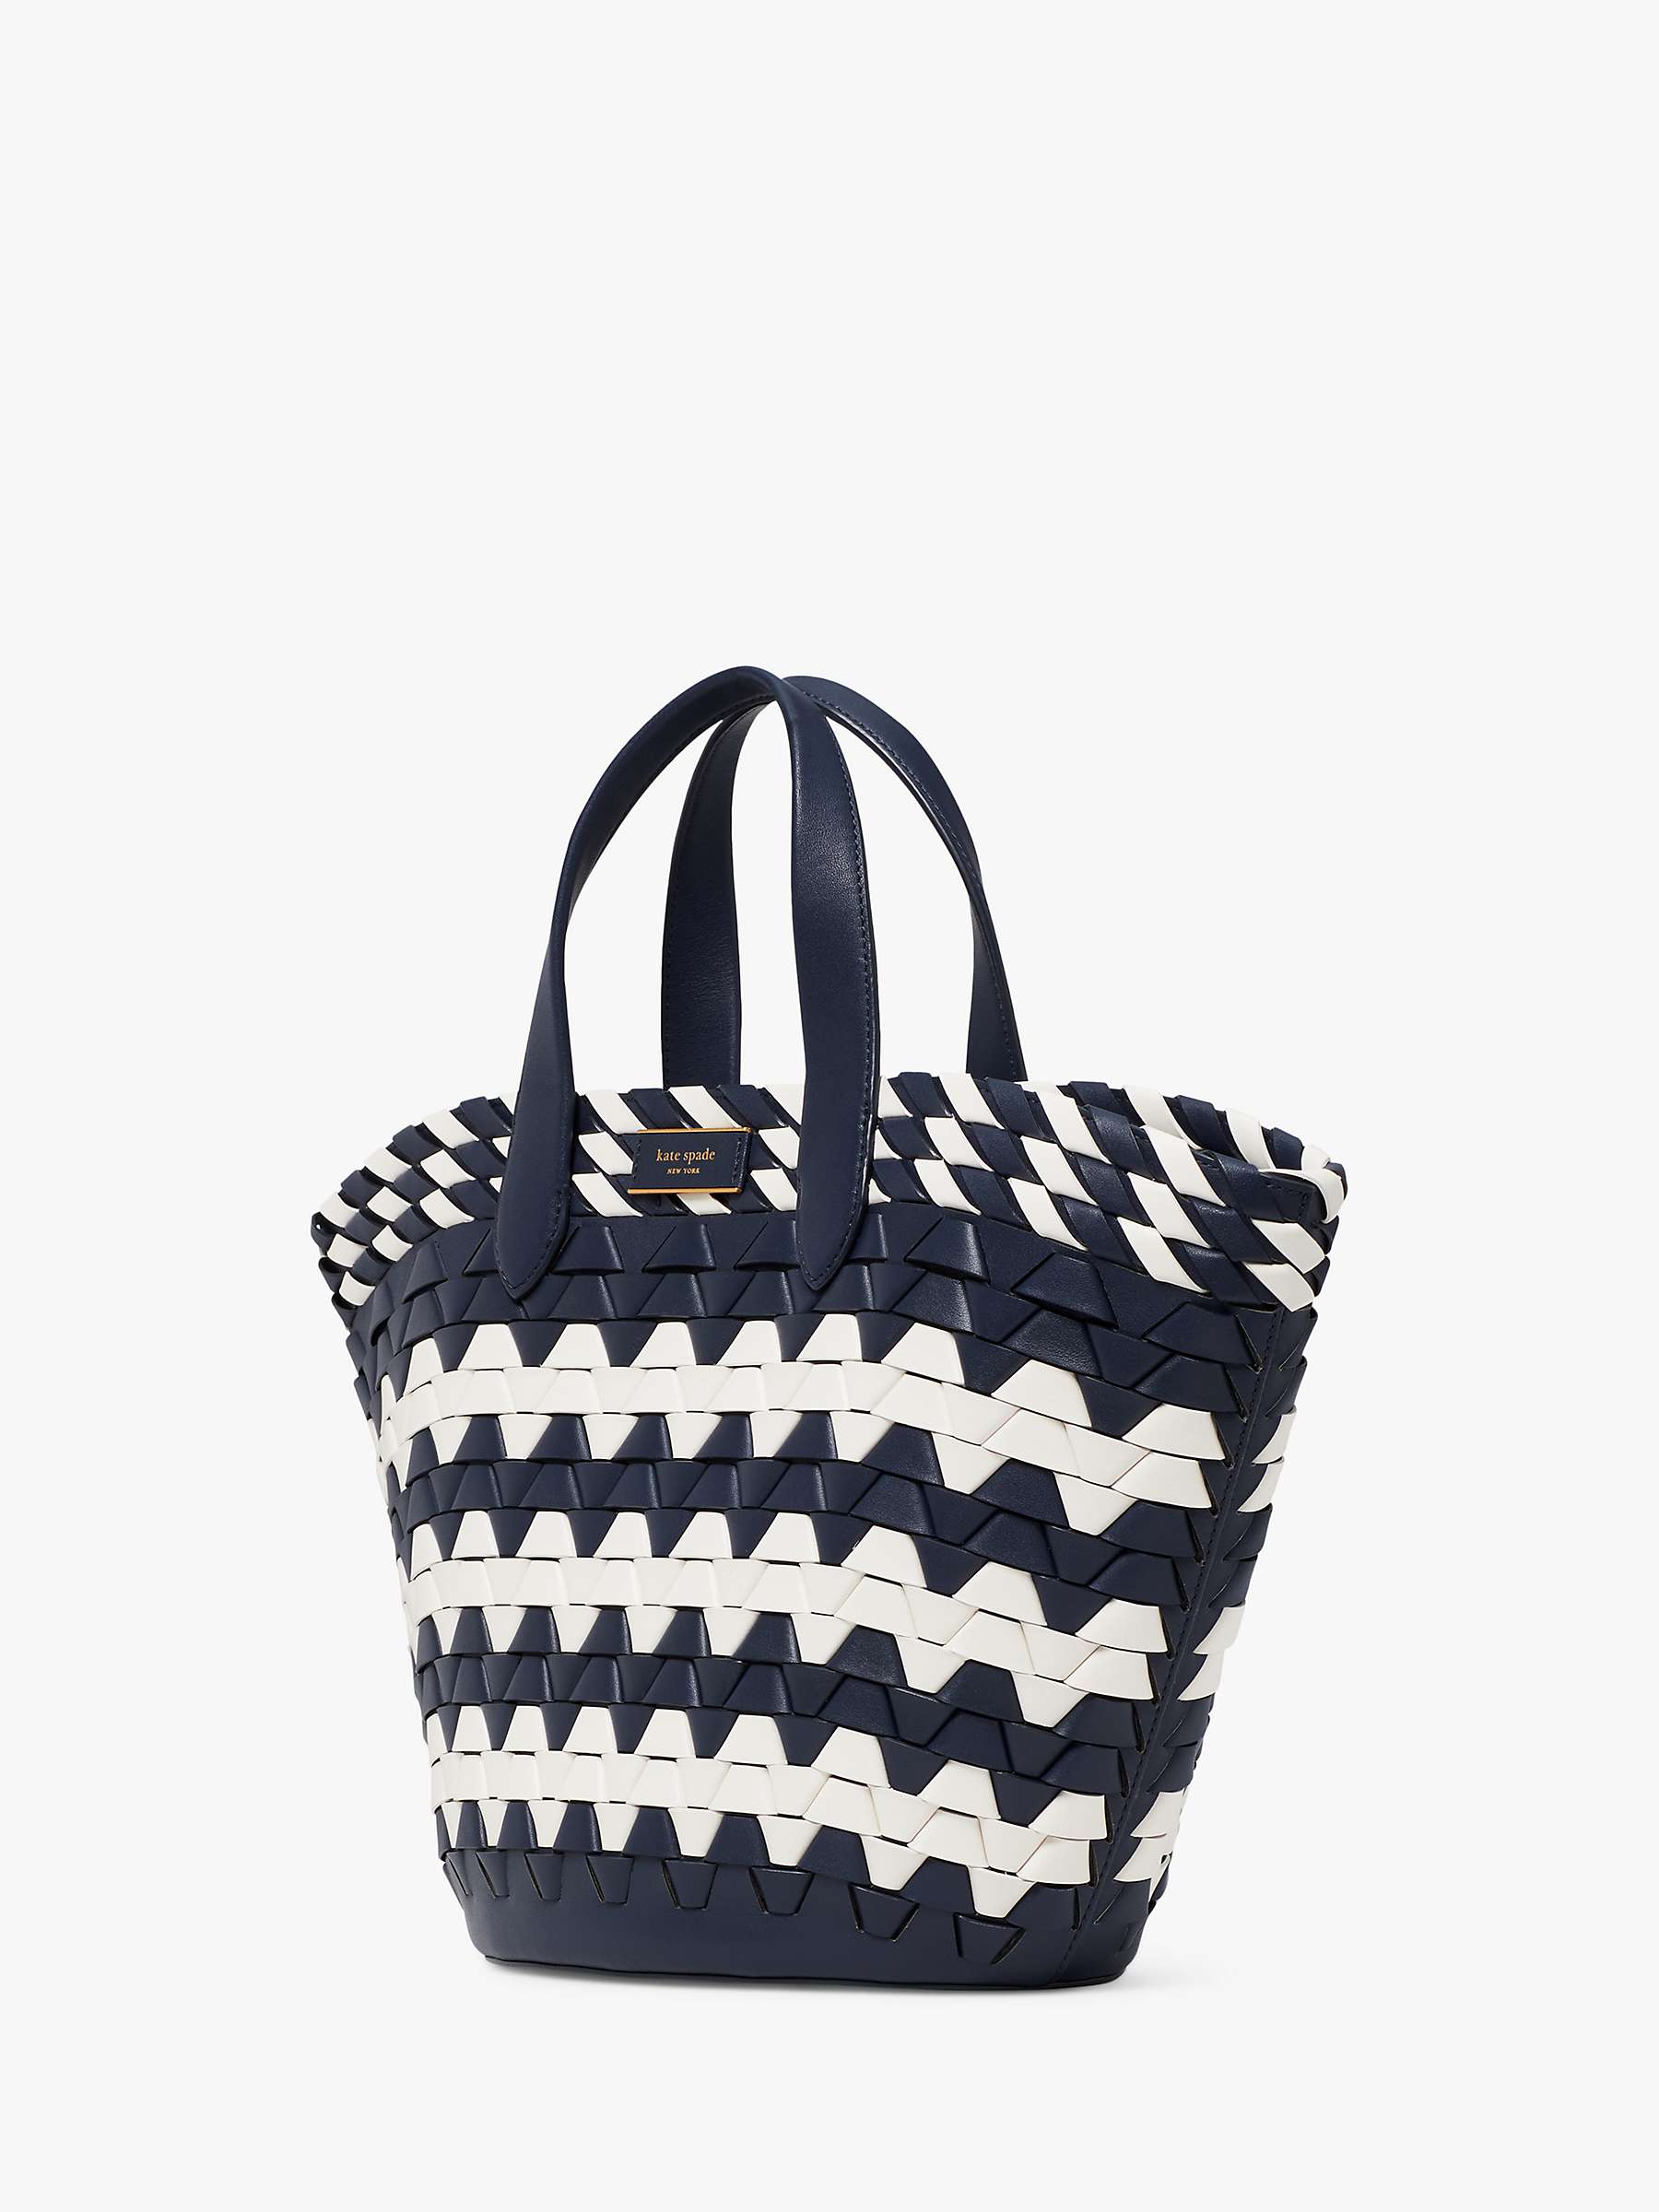 kate spade new york Zigzag Woven Leather Small Tote Bag at John Lewis ...